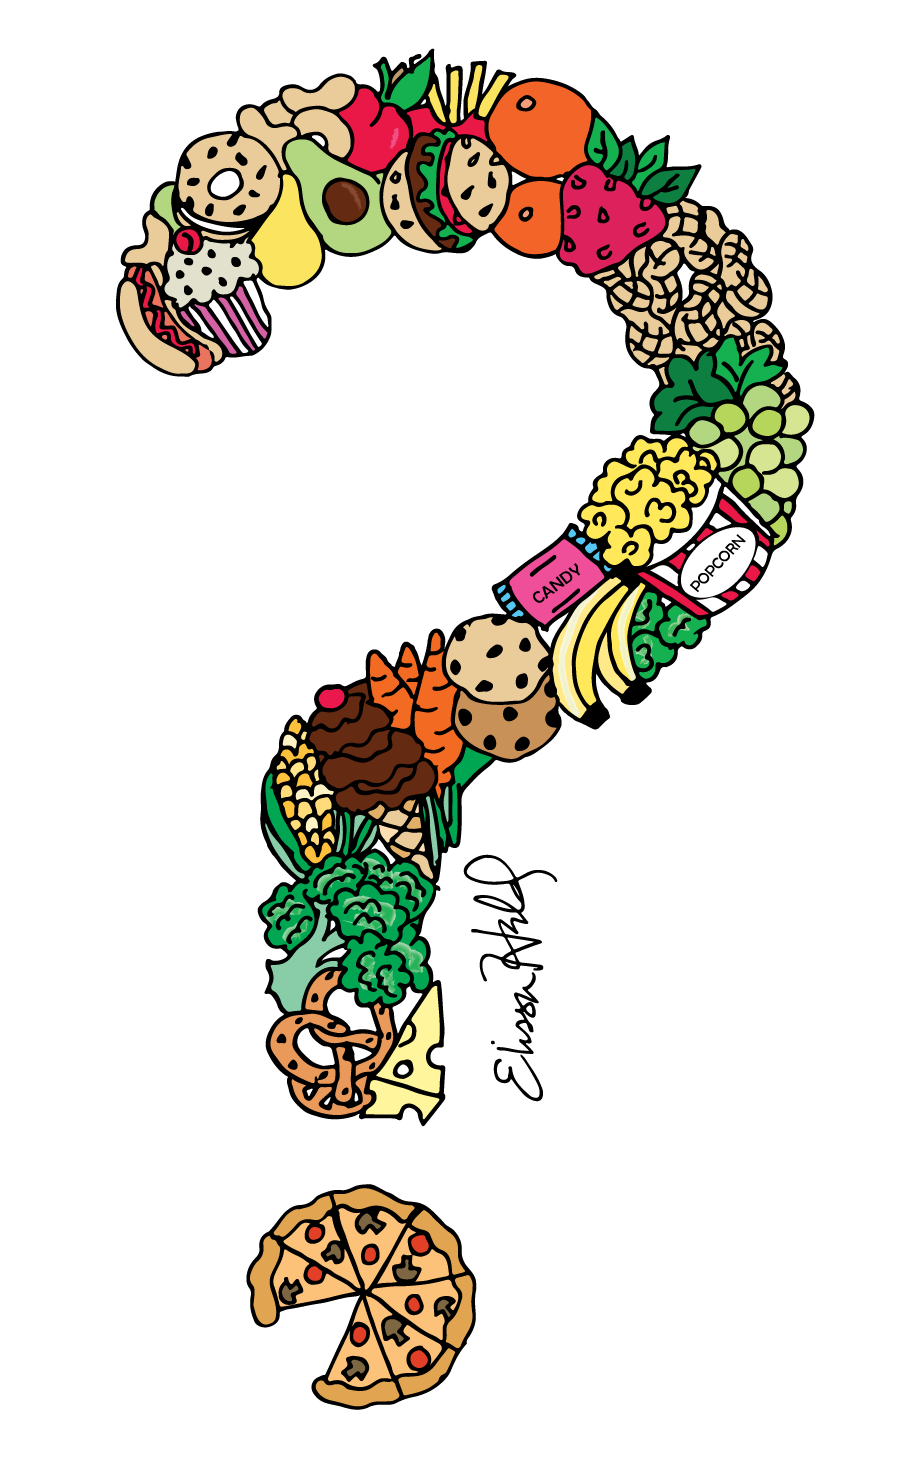 question mark in full color featuring different foods in the shape of a question mark